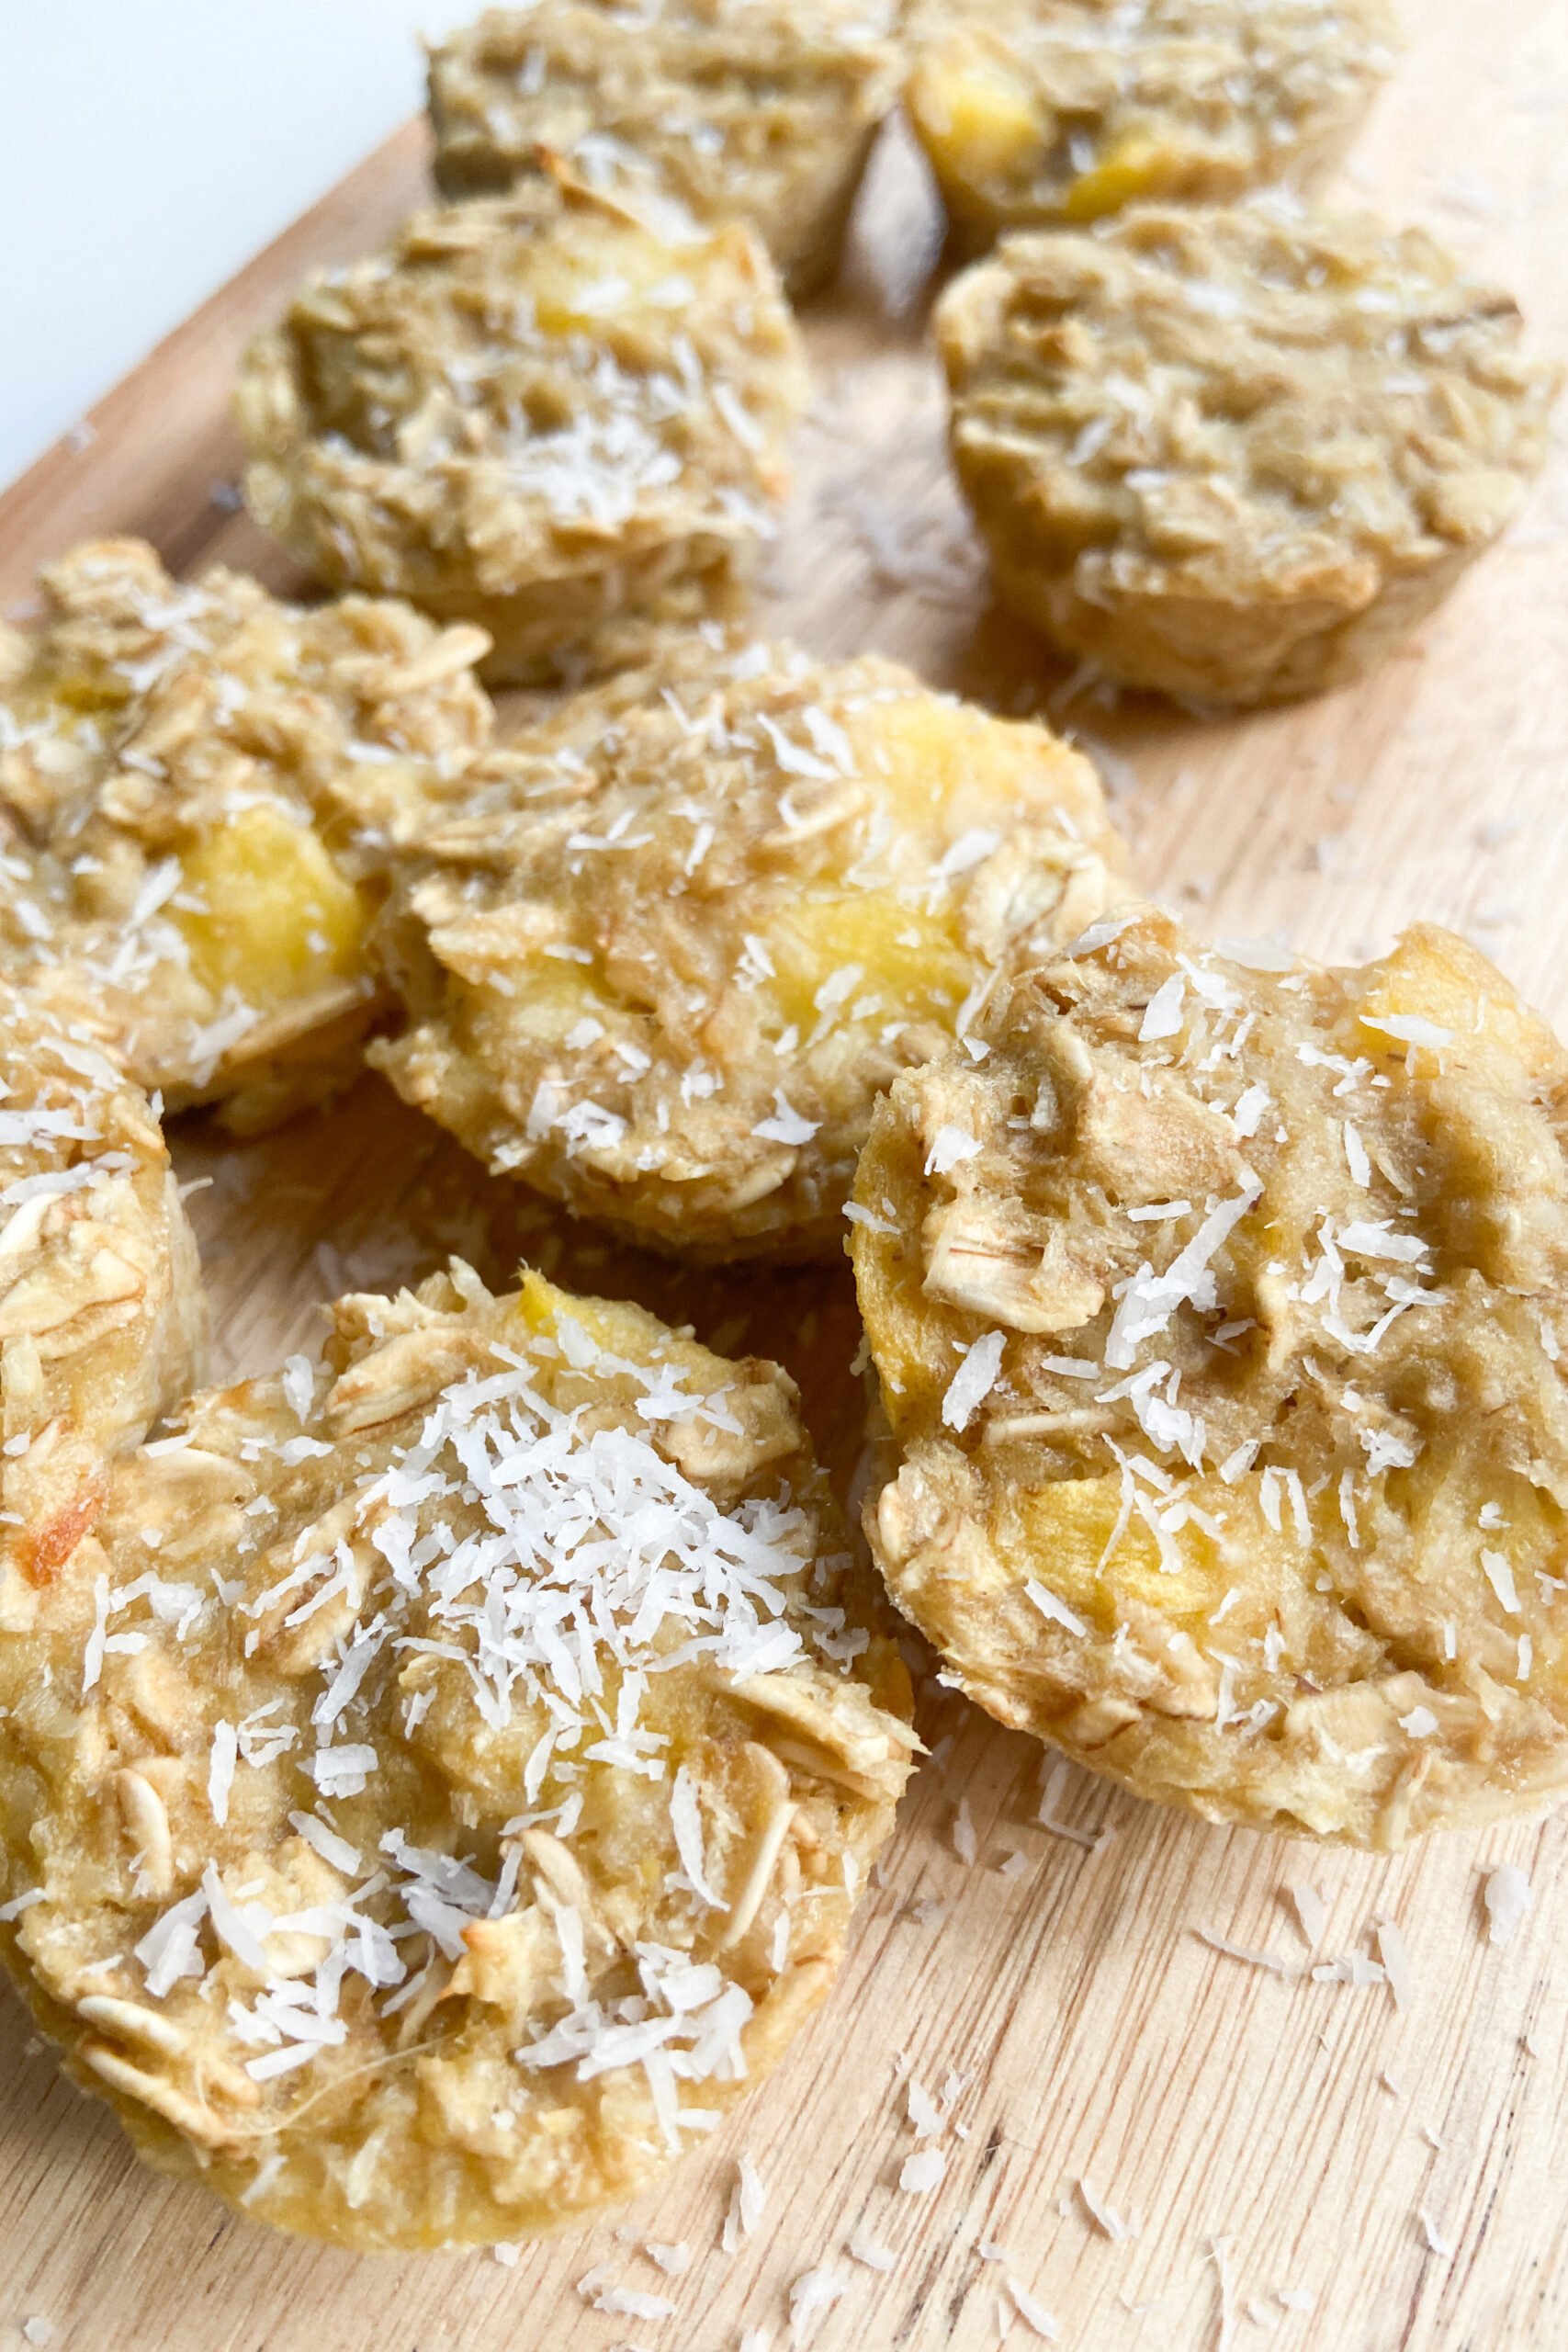 Mango banana oat bites with coconut sprinkled on top